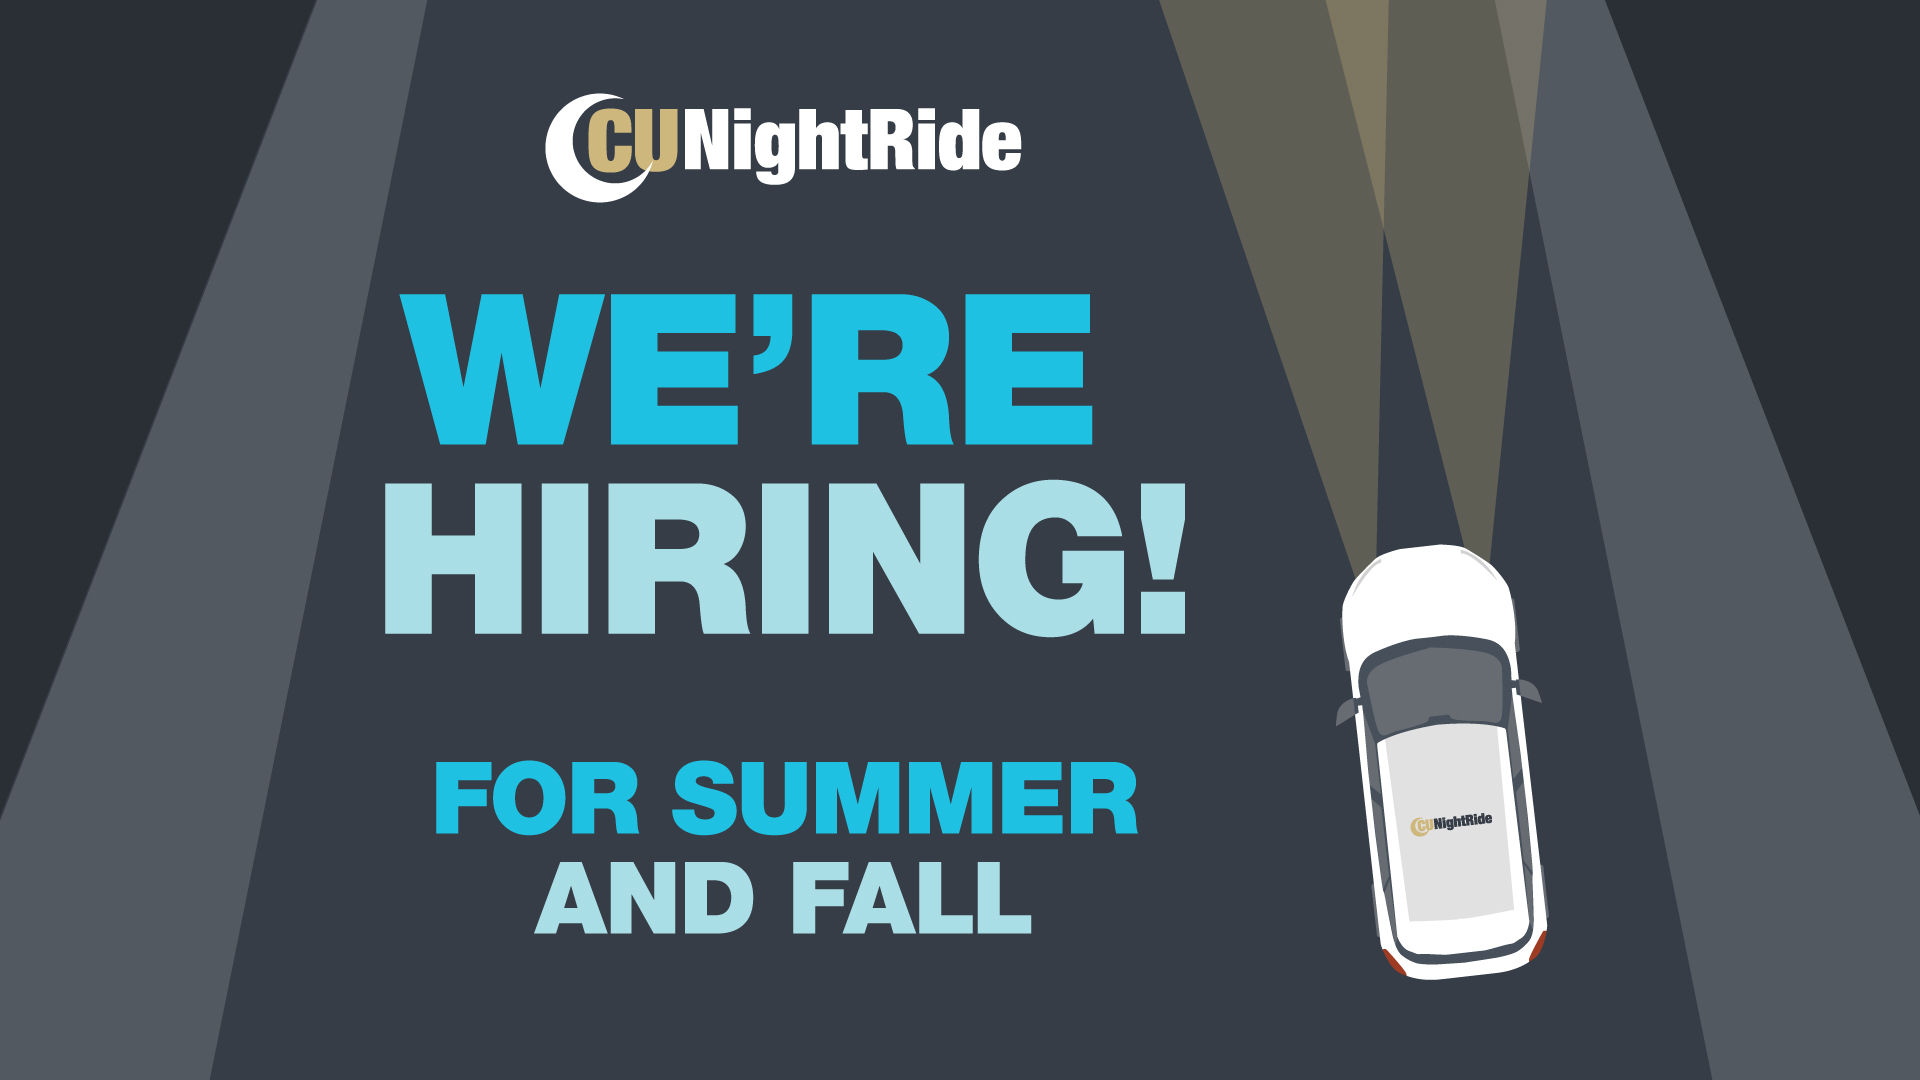 We're hiring for summer and fall